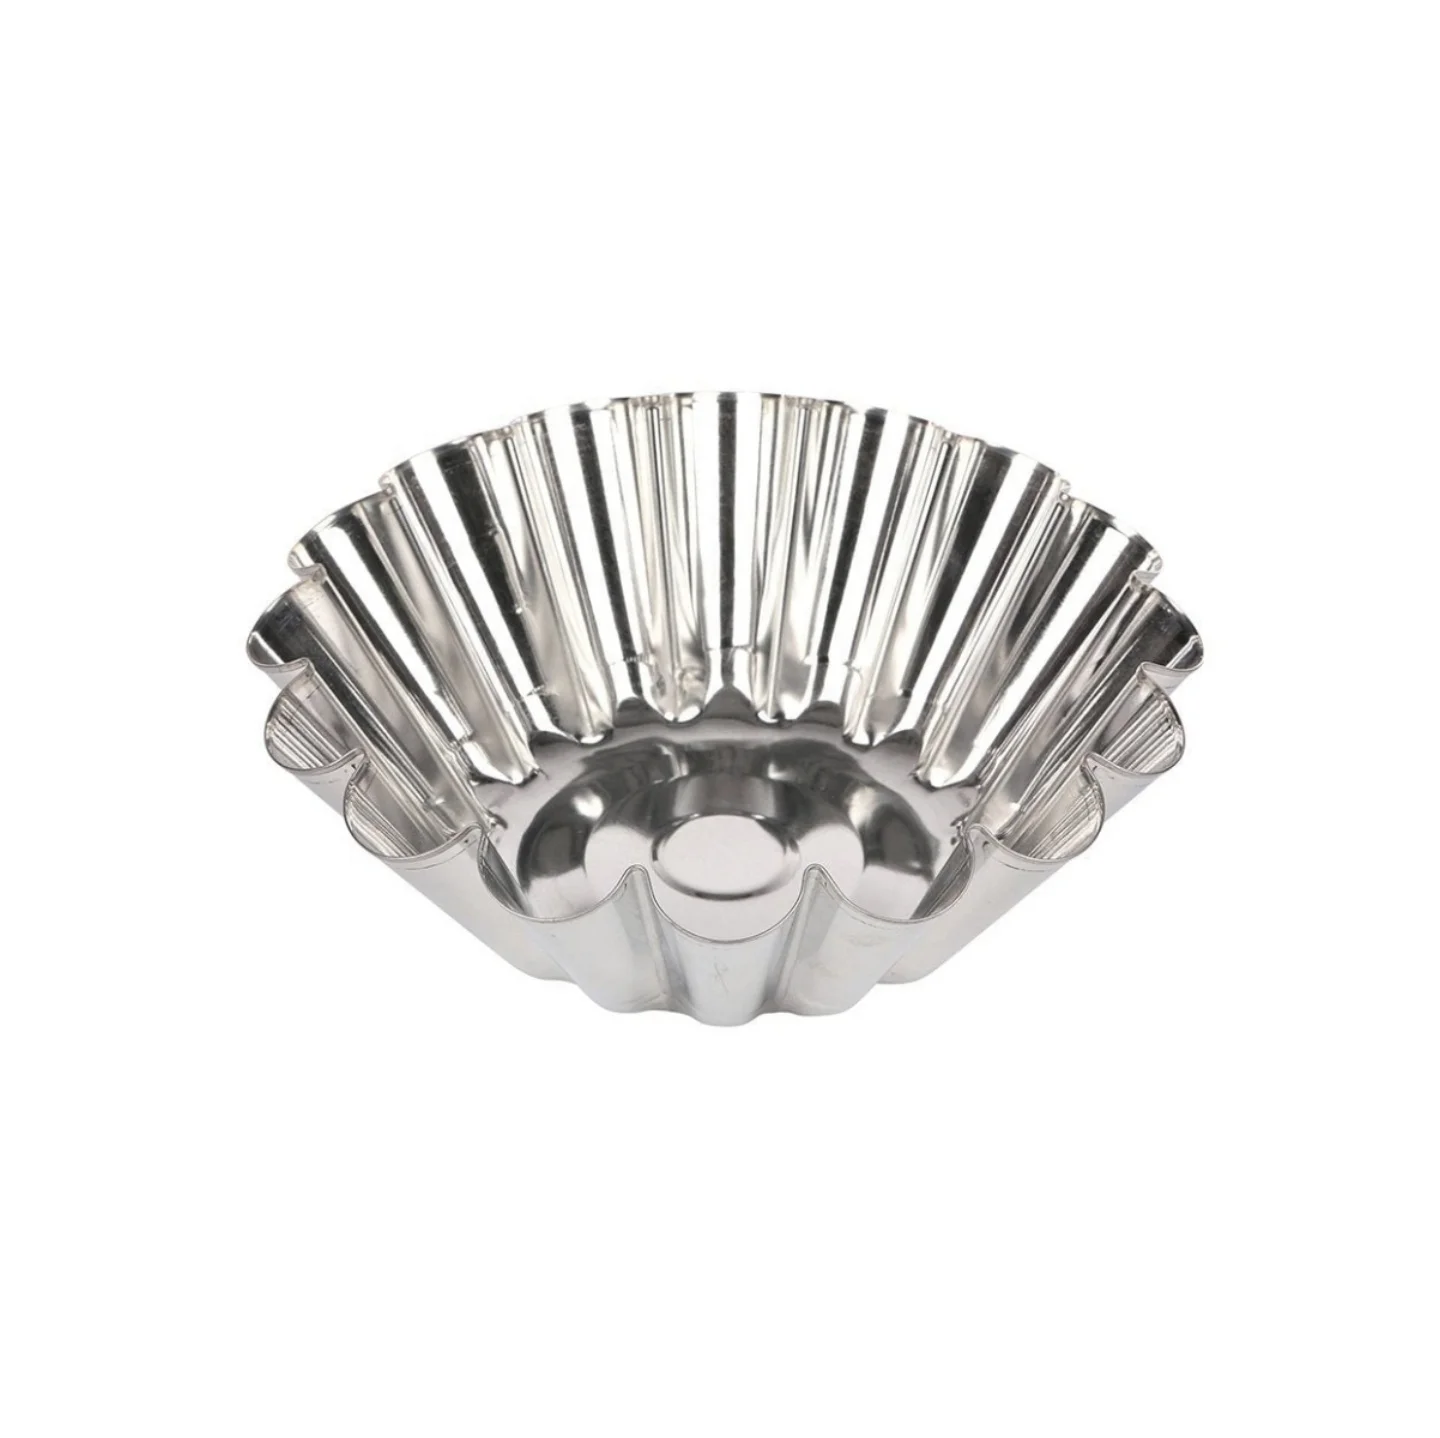 17cm Tin plated Fluted Brioche Mould Tinned Steel French Brioche Baking Mold Round Baking Moulds with Flat Bottom